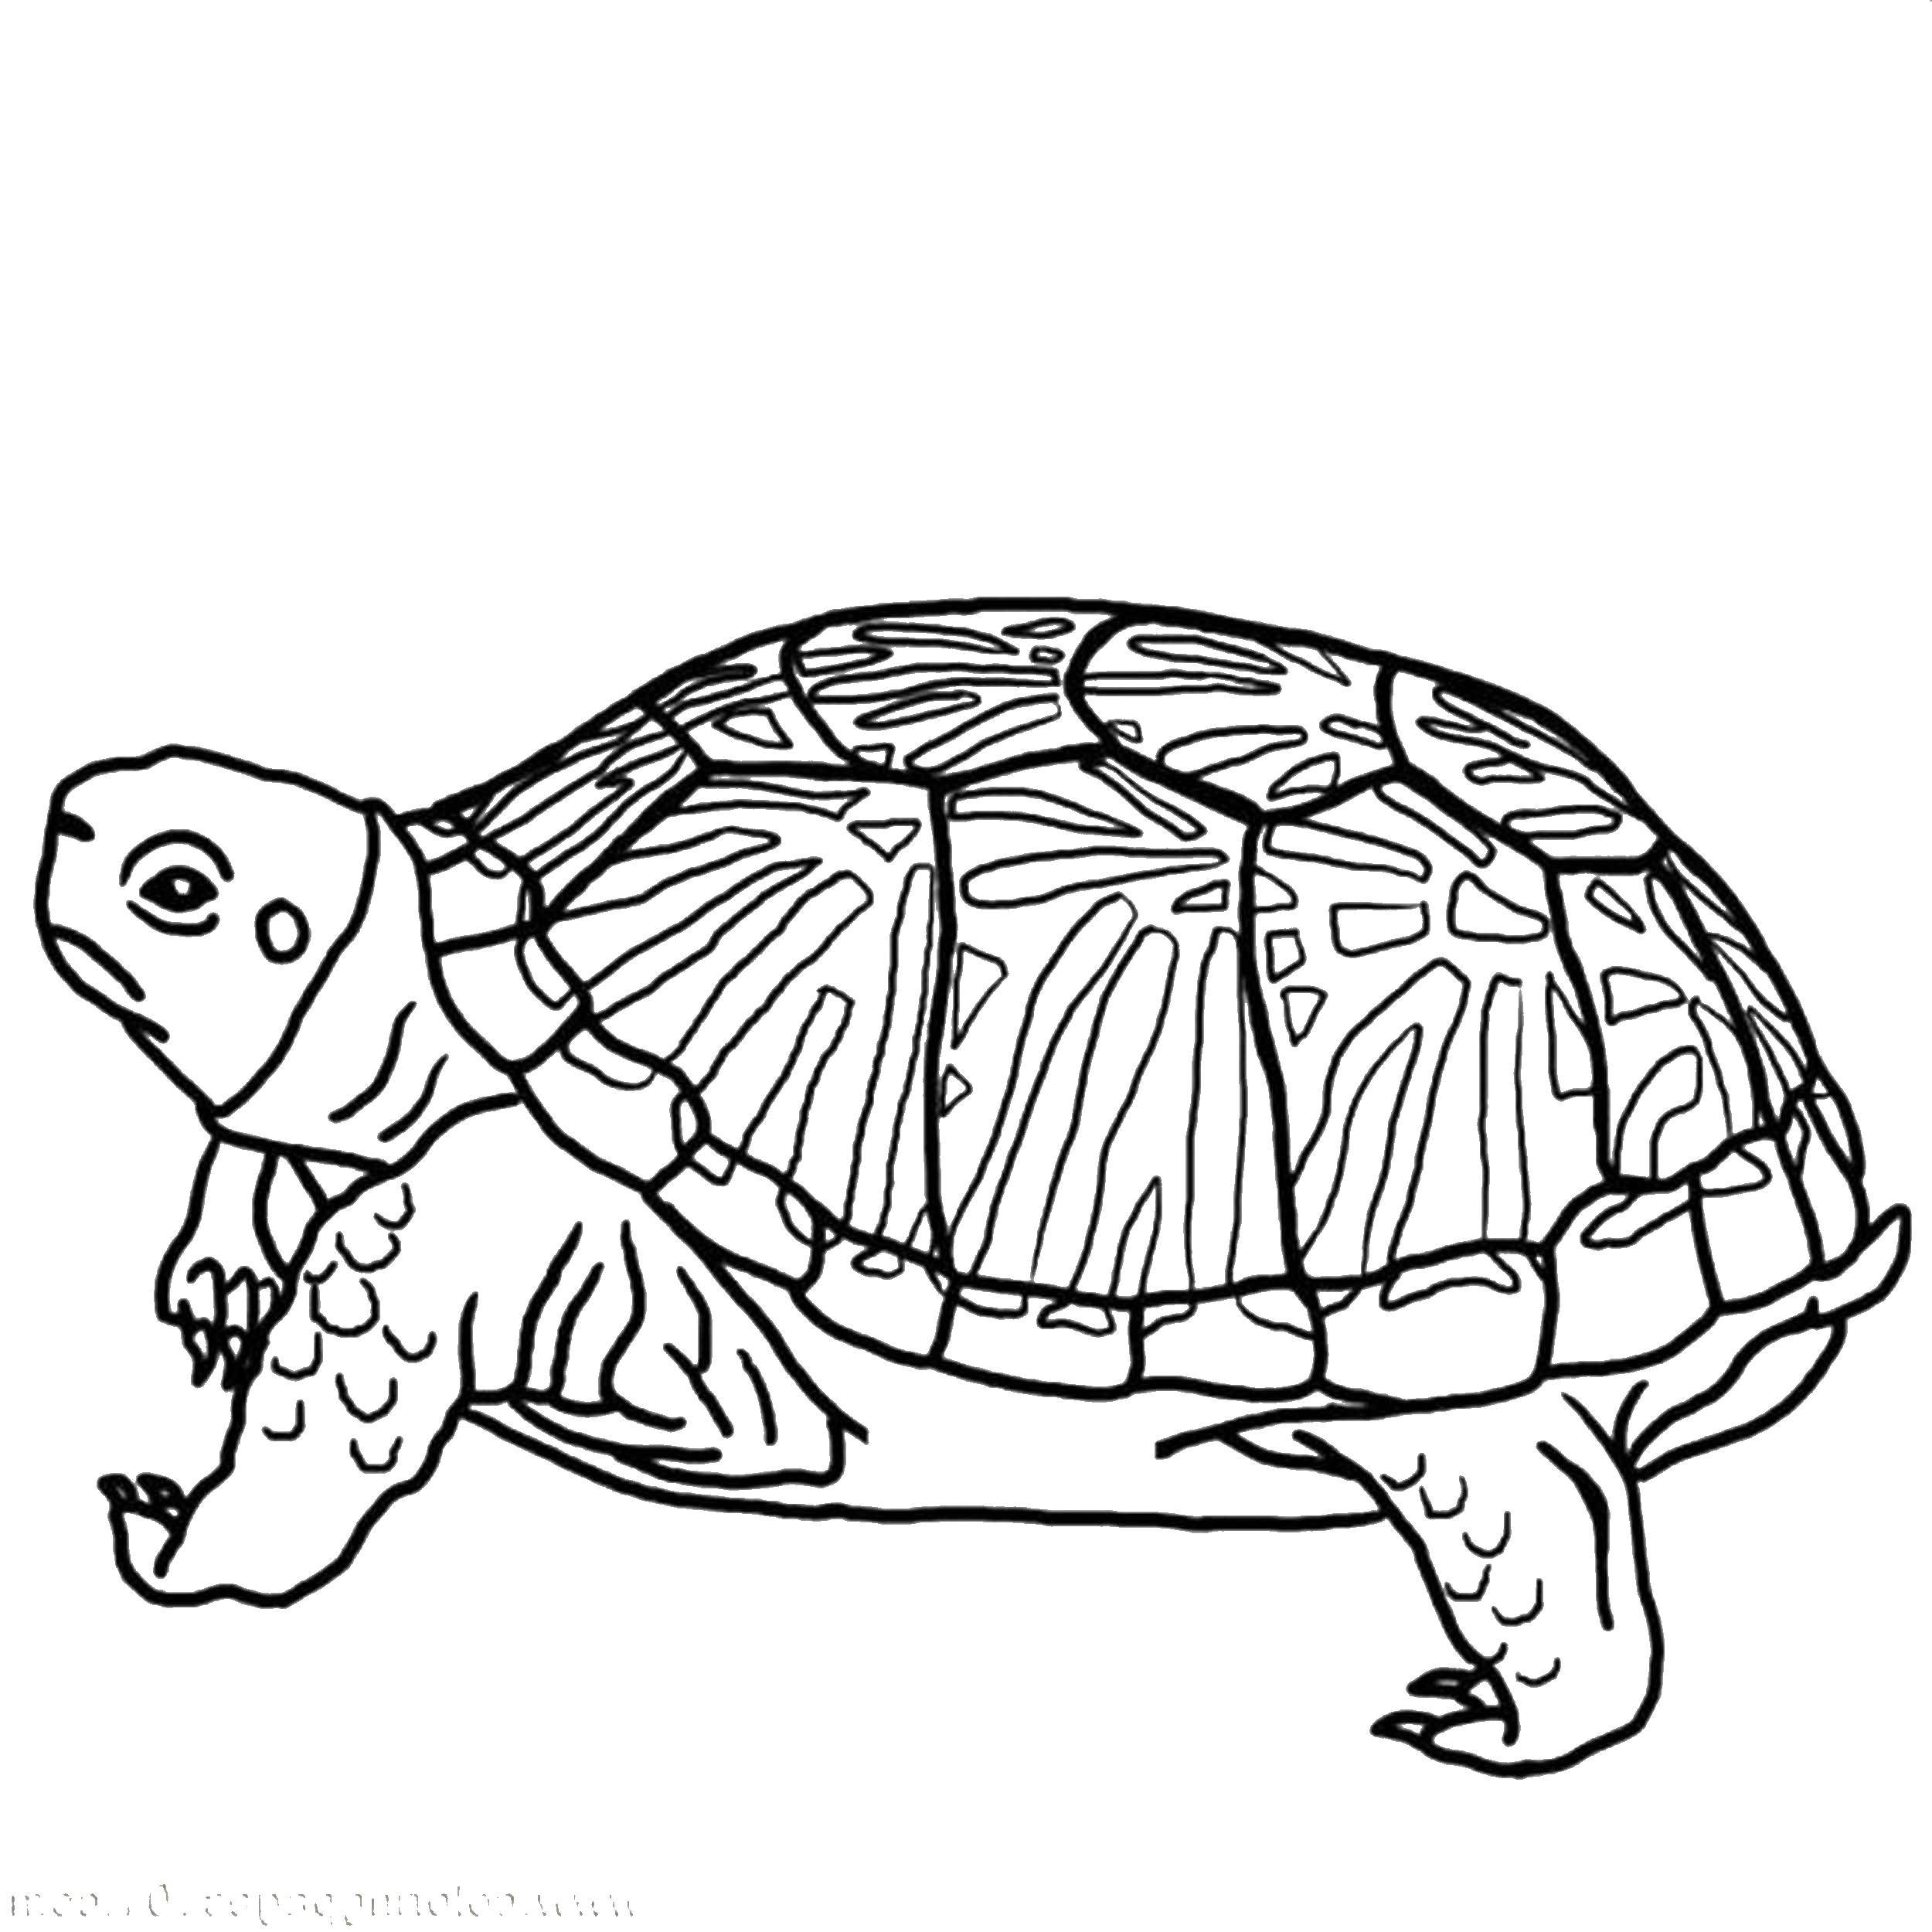 Coloring Unhappy turtle. Category Animals. Tags:  animals, turtle, shell.